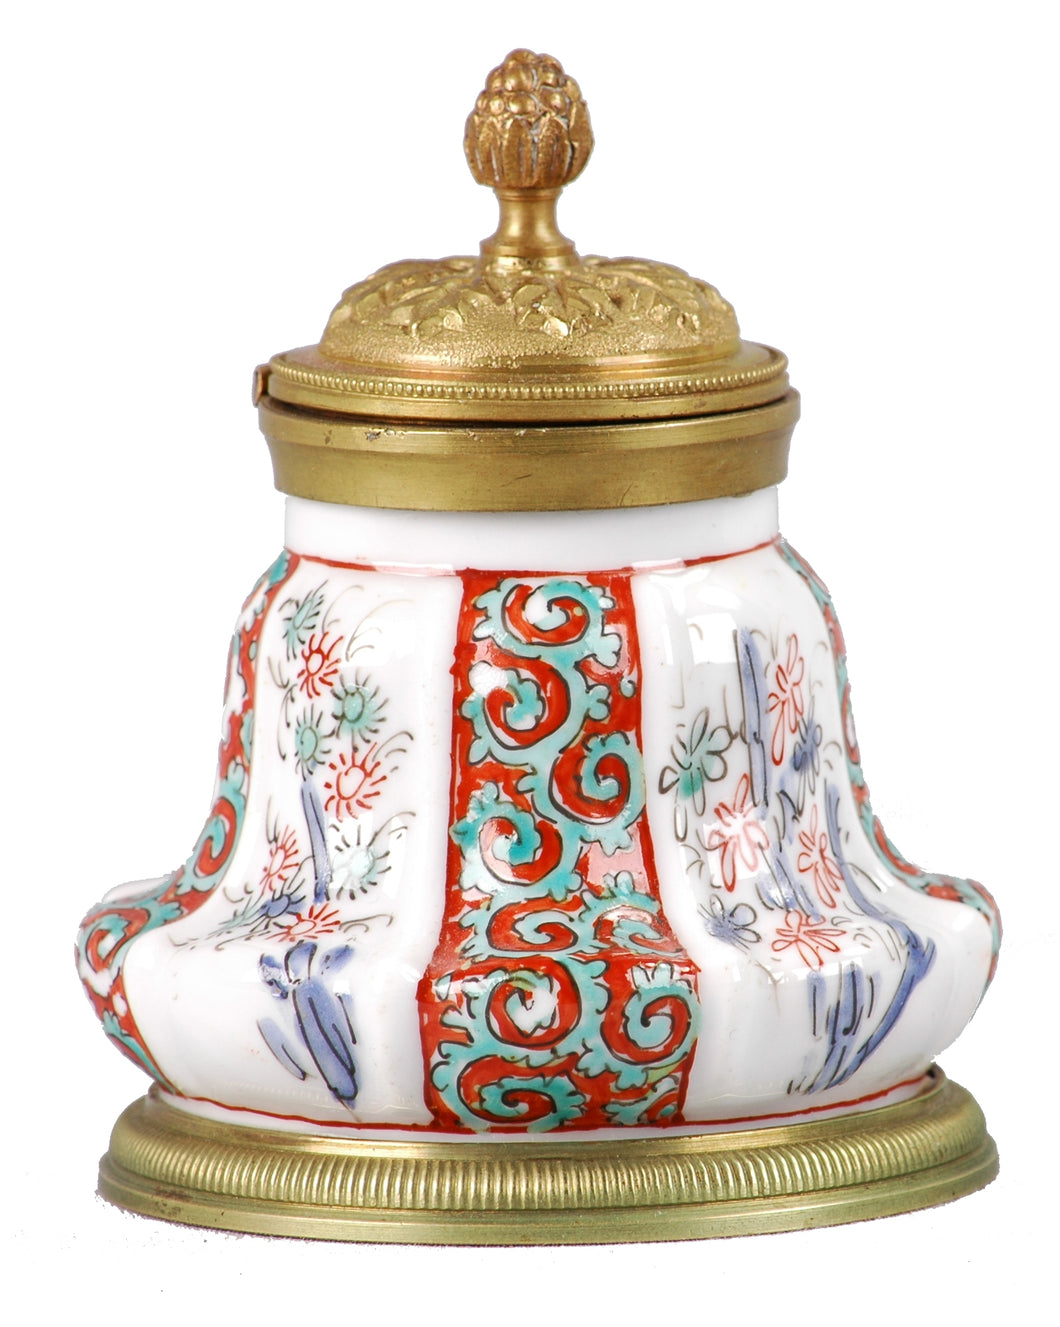 Sèvres Ormolu Mounted Inkwell